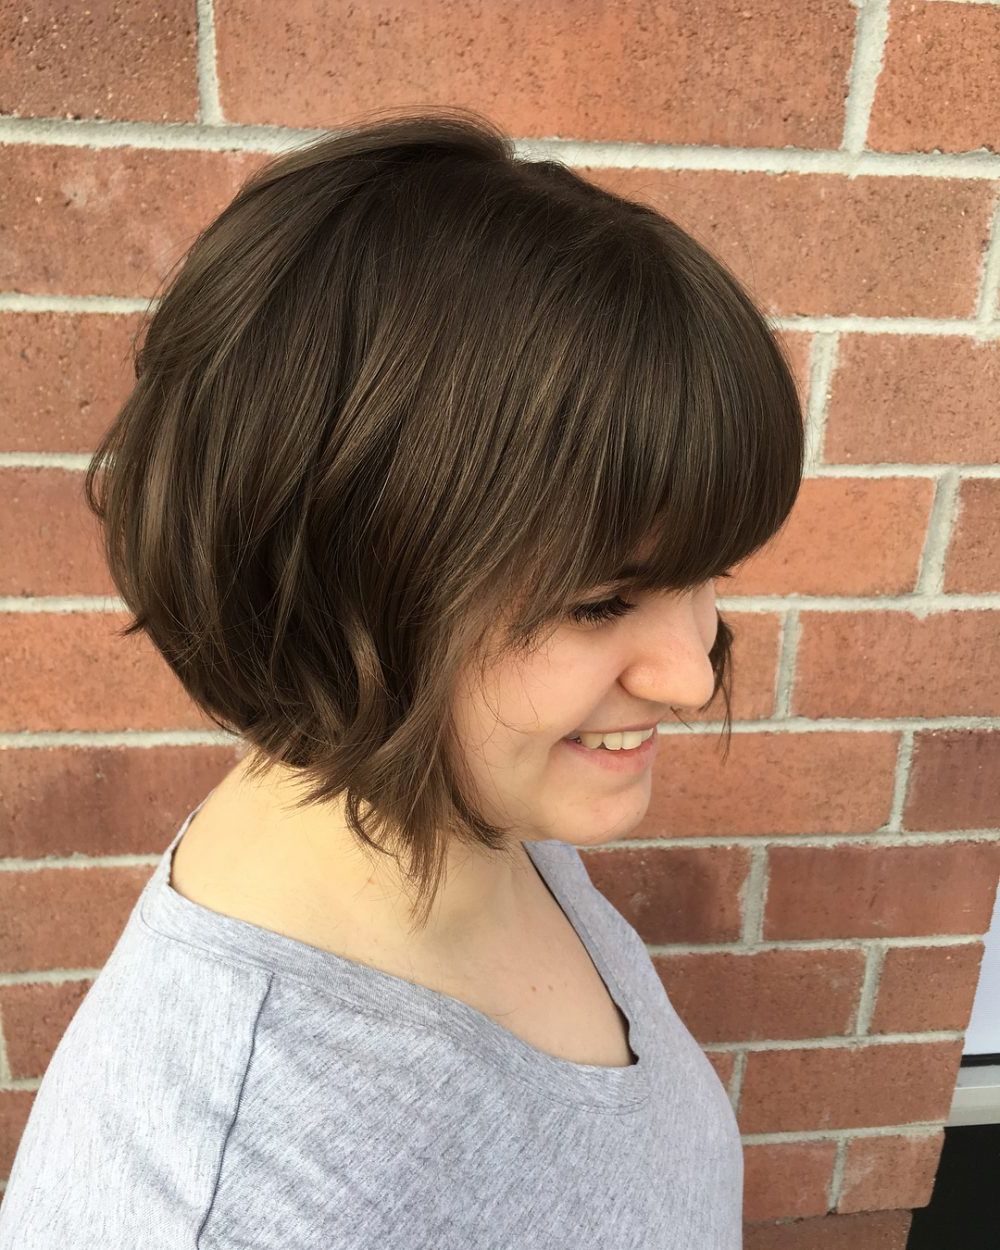 34 Greatest Short Haircuts And Hairstyles For Thick Hair For 2018 Regarding Short Haircuts With Side Bangs (View 8 of 25)